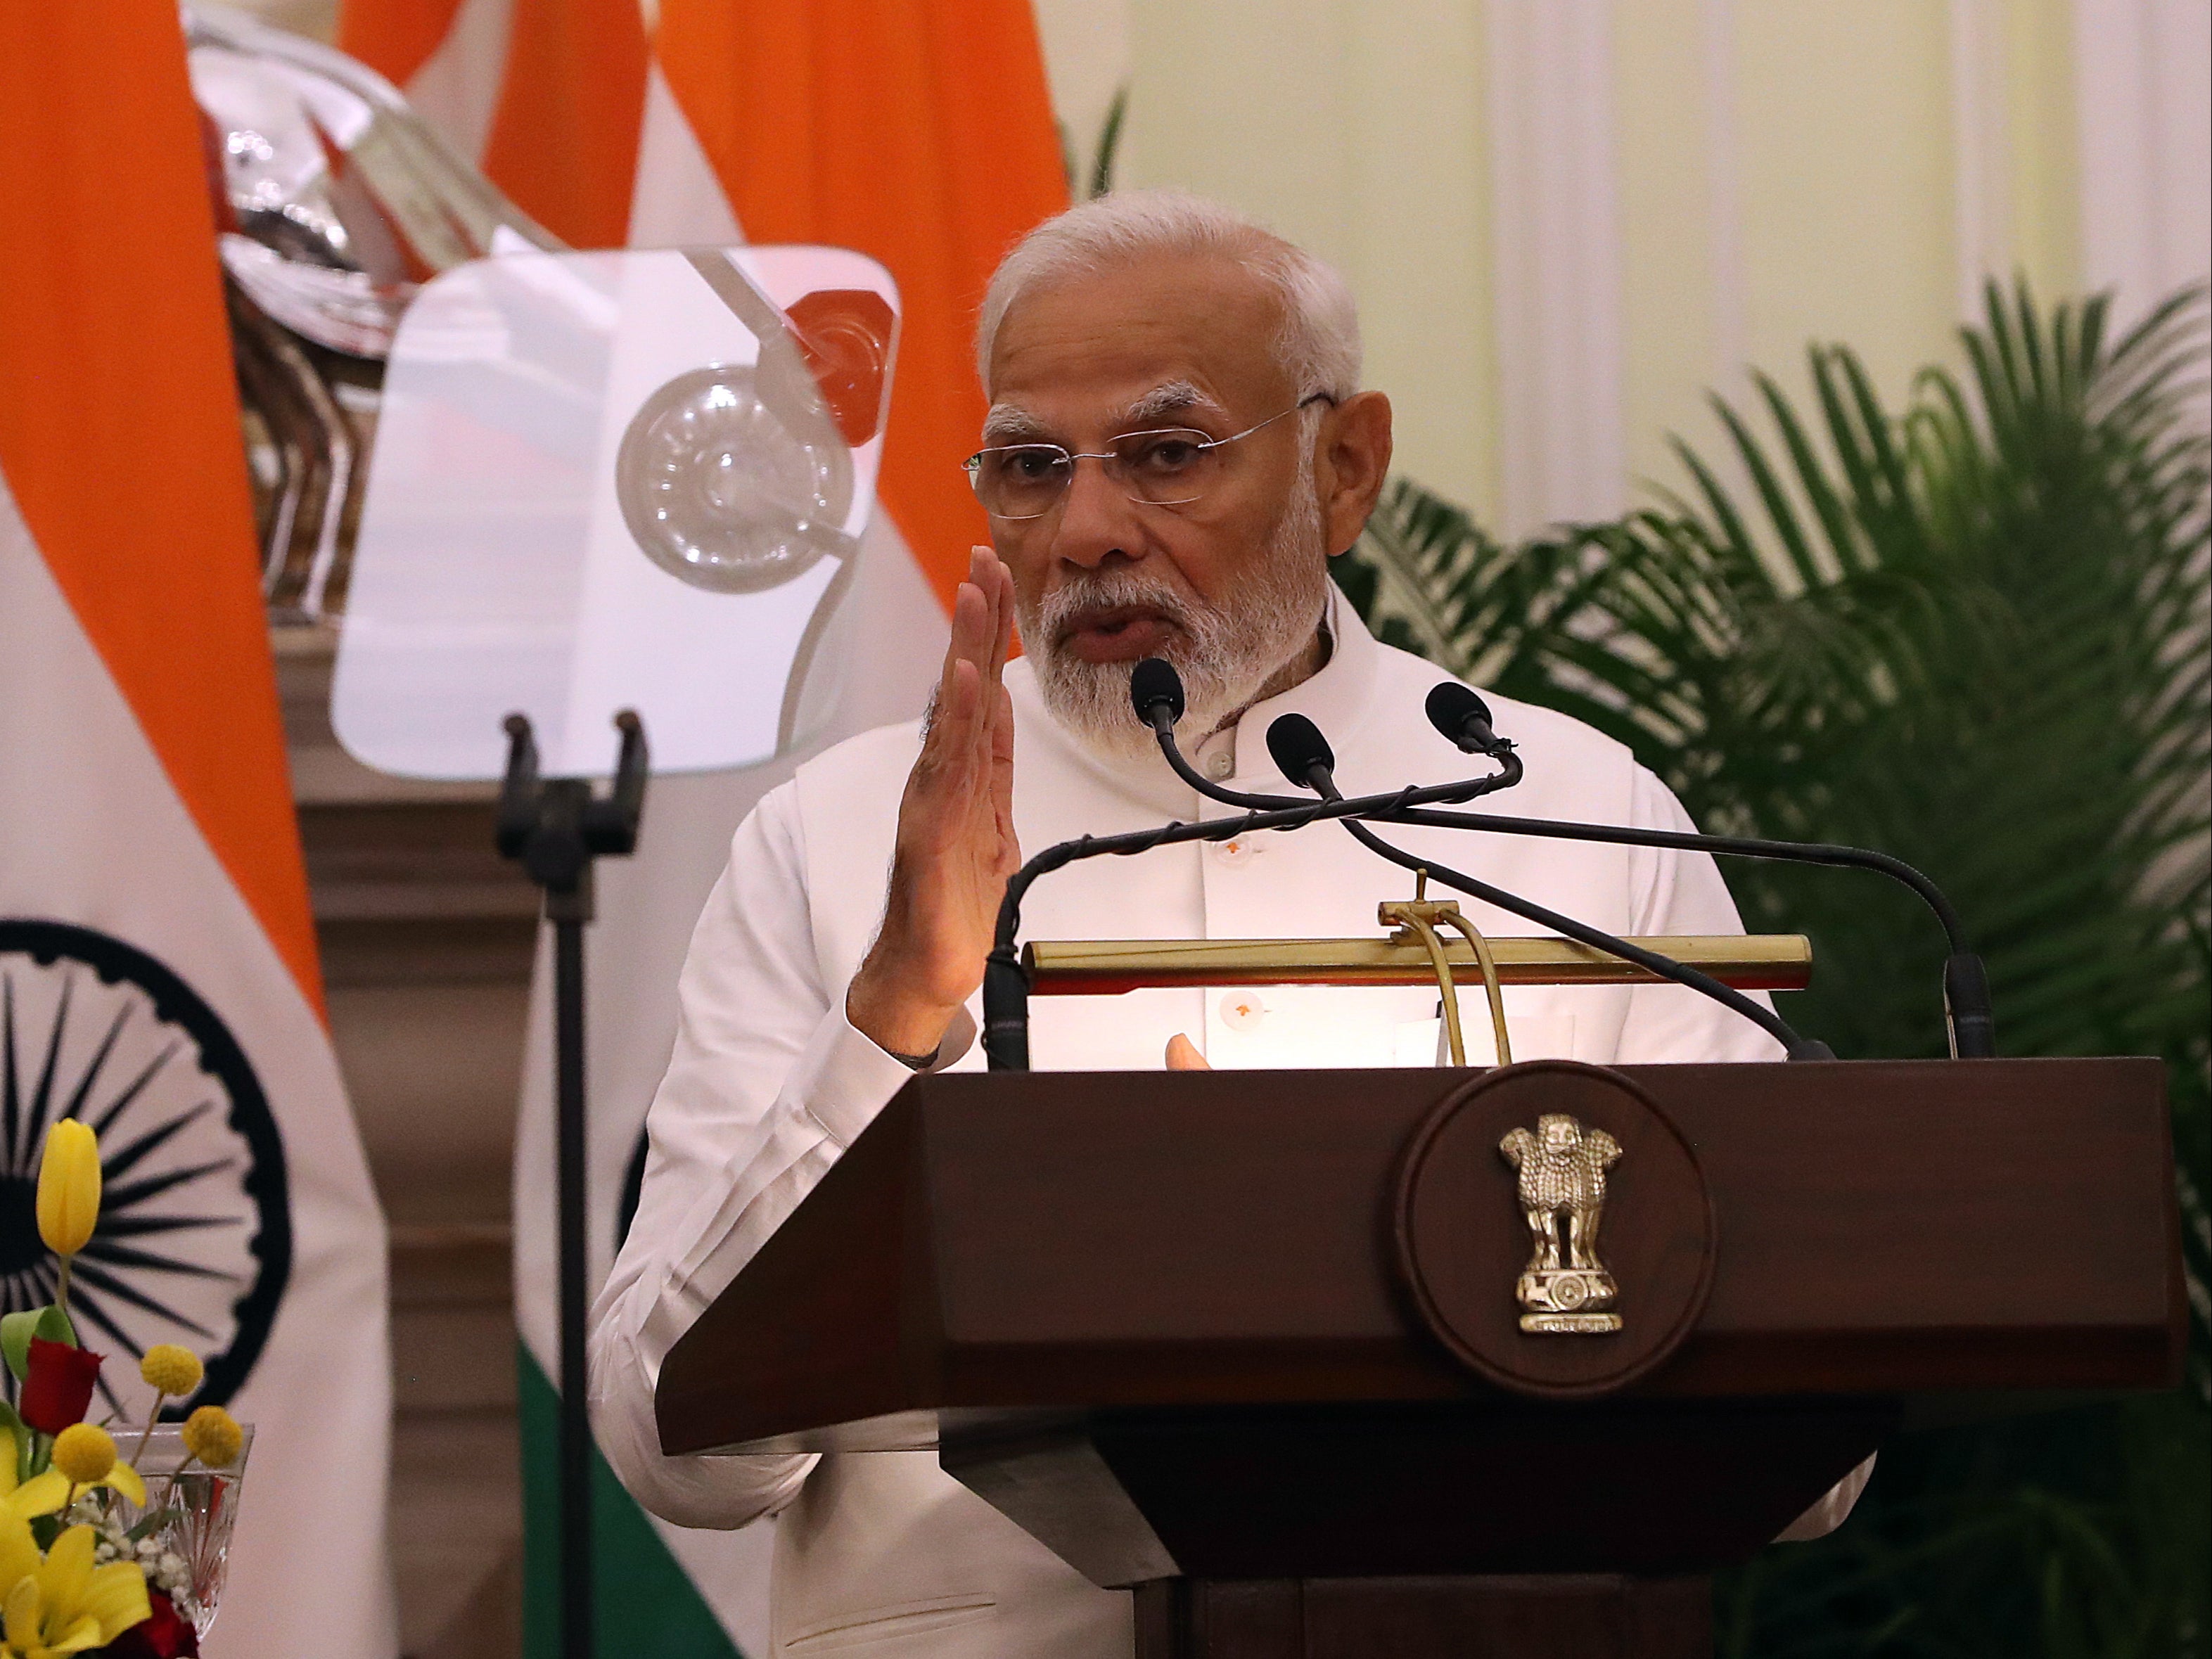 The Indian prime minister during a speech last week in Delhi